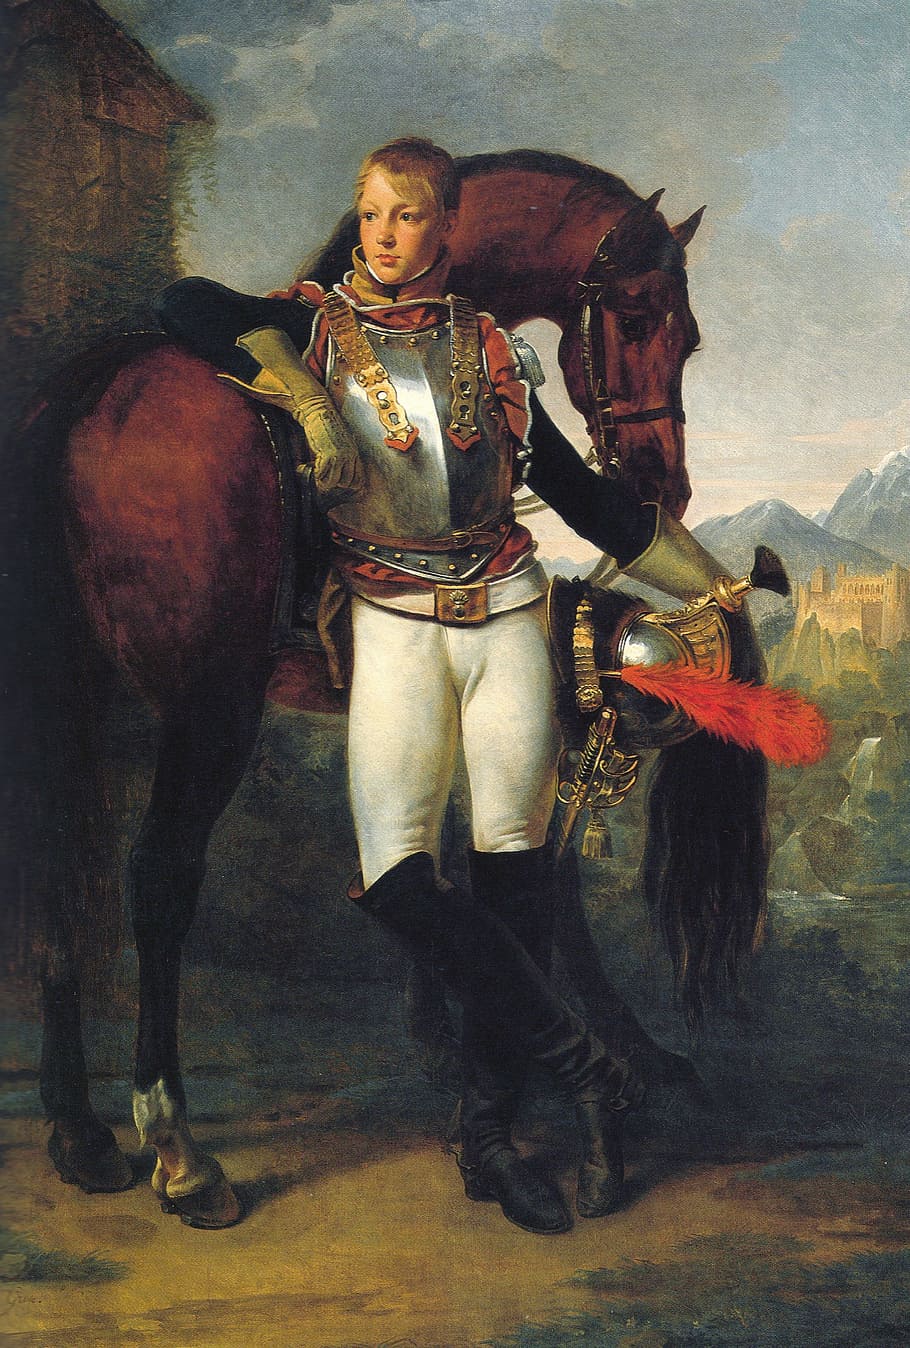 knight, standing, horse painting, antoine gros, painting, oil on canvas, art, artistic, artistry, portrait